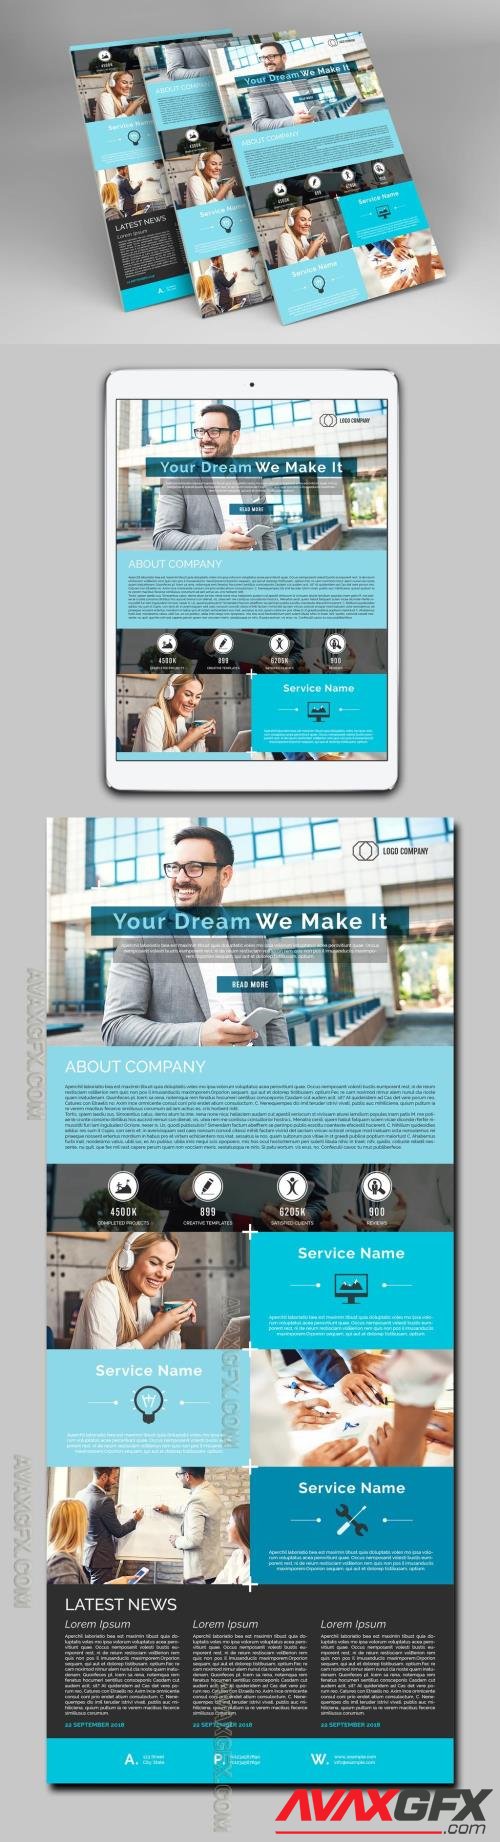 Web Newsletter Layout with Blue Accents 221035023 [Adobestock]